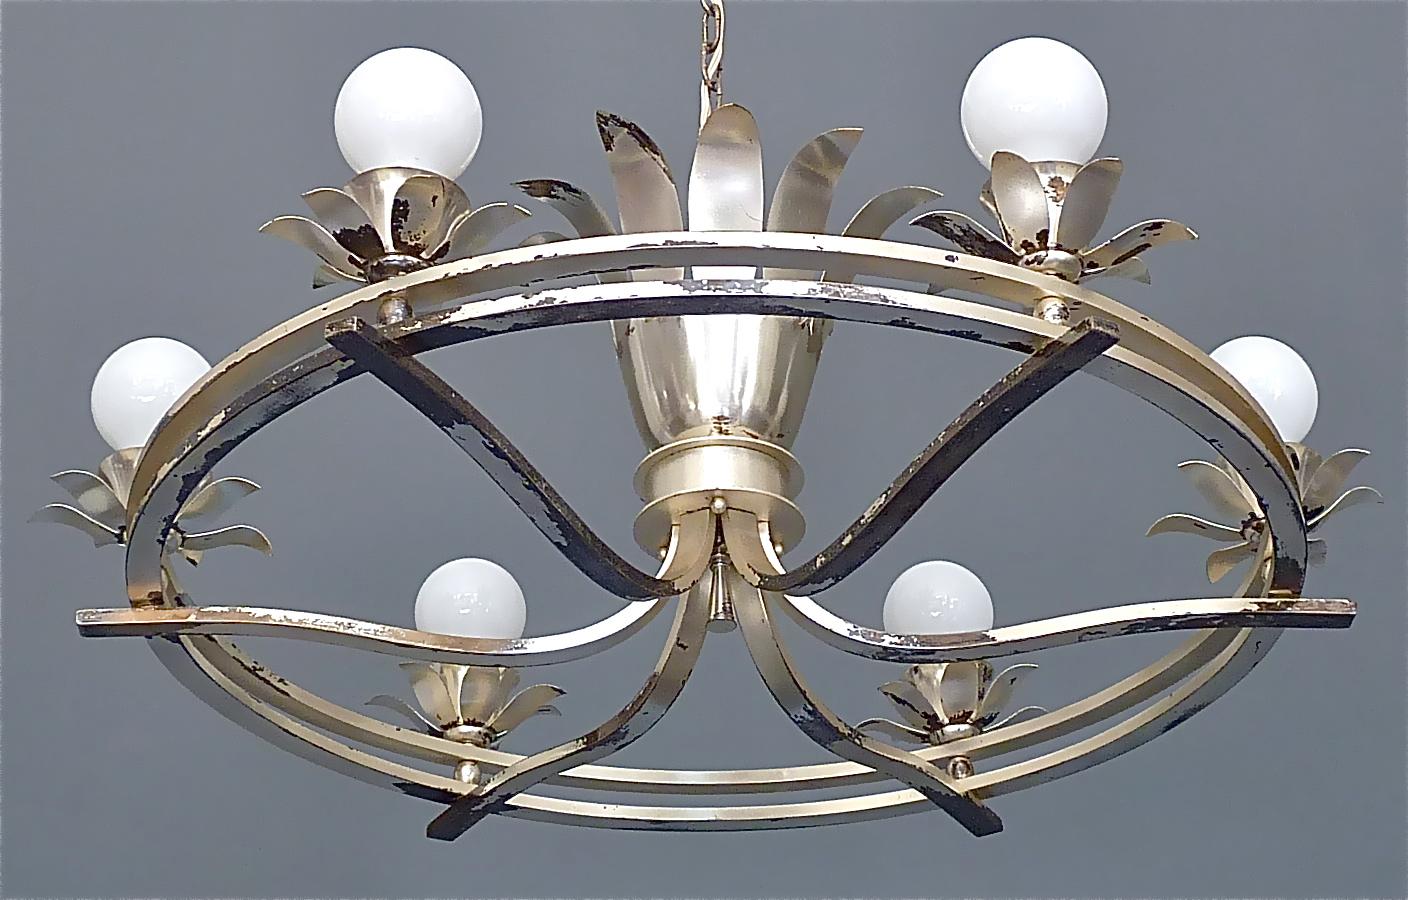 Huge elegant Art Deco chandelier with lovely leaf and flower details designed and executed in France in the 1930s. The silvered brass metal chandelier which originates from a Villa in Luxemburg is 80 cm / 31.50 inches tall and has a width of 85 cm /